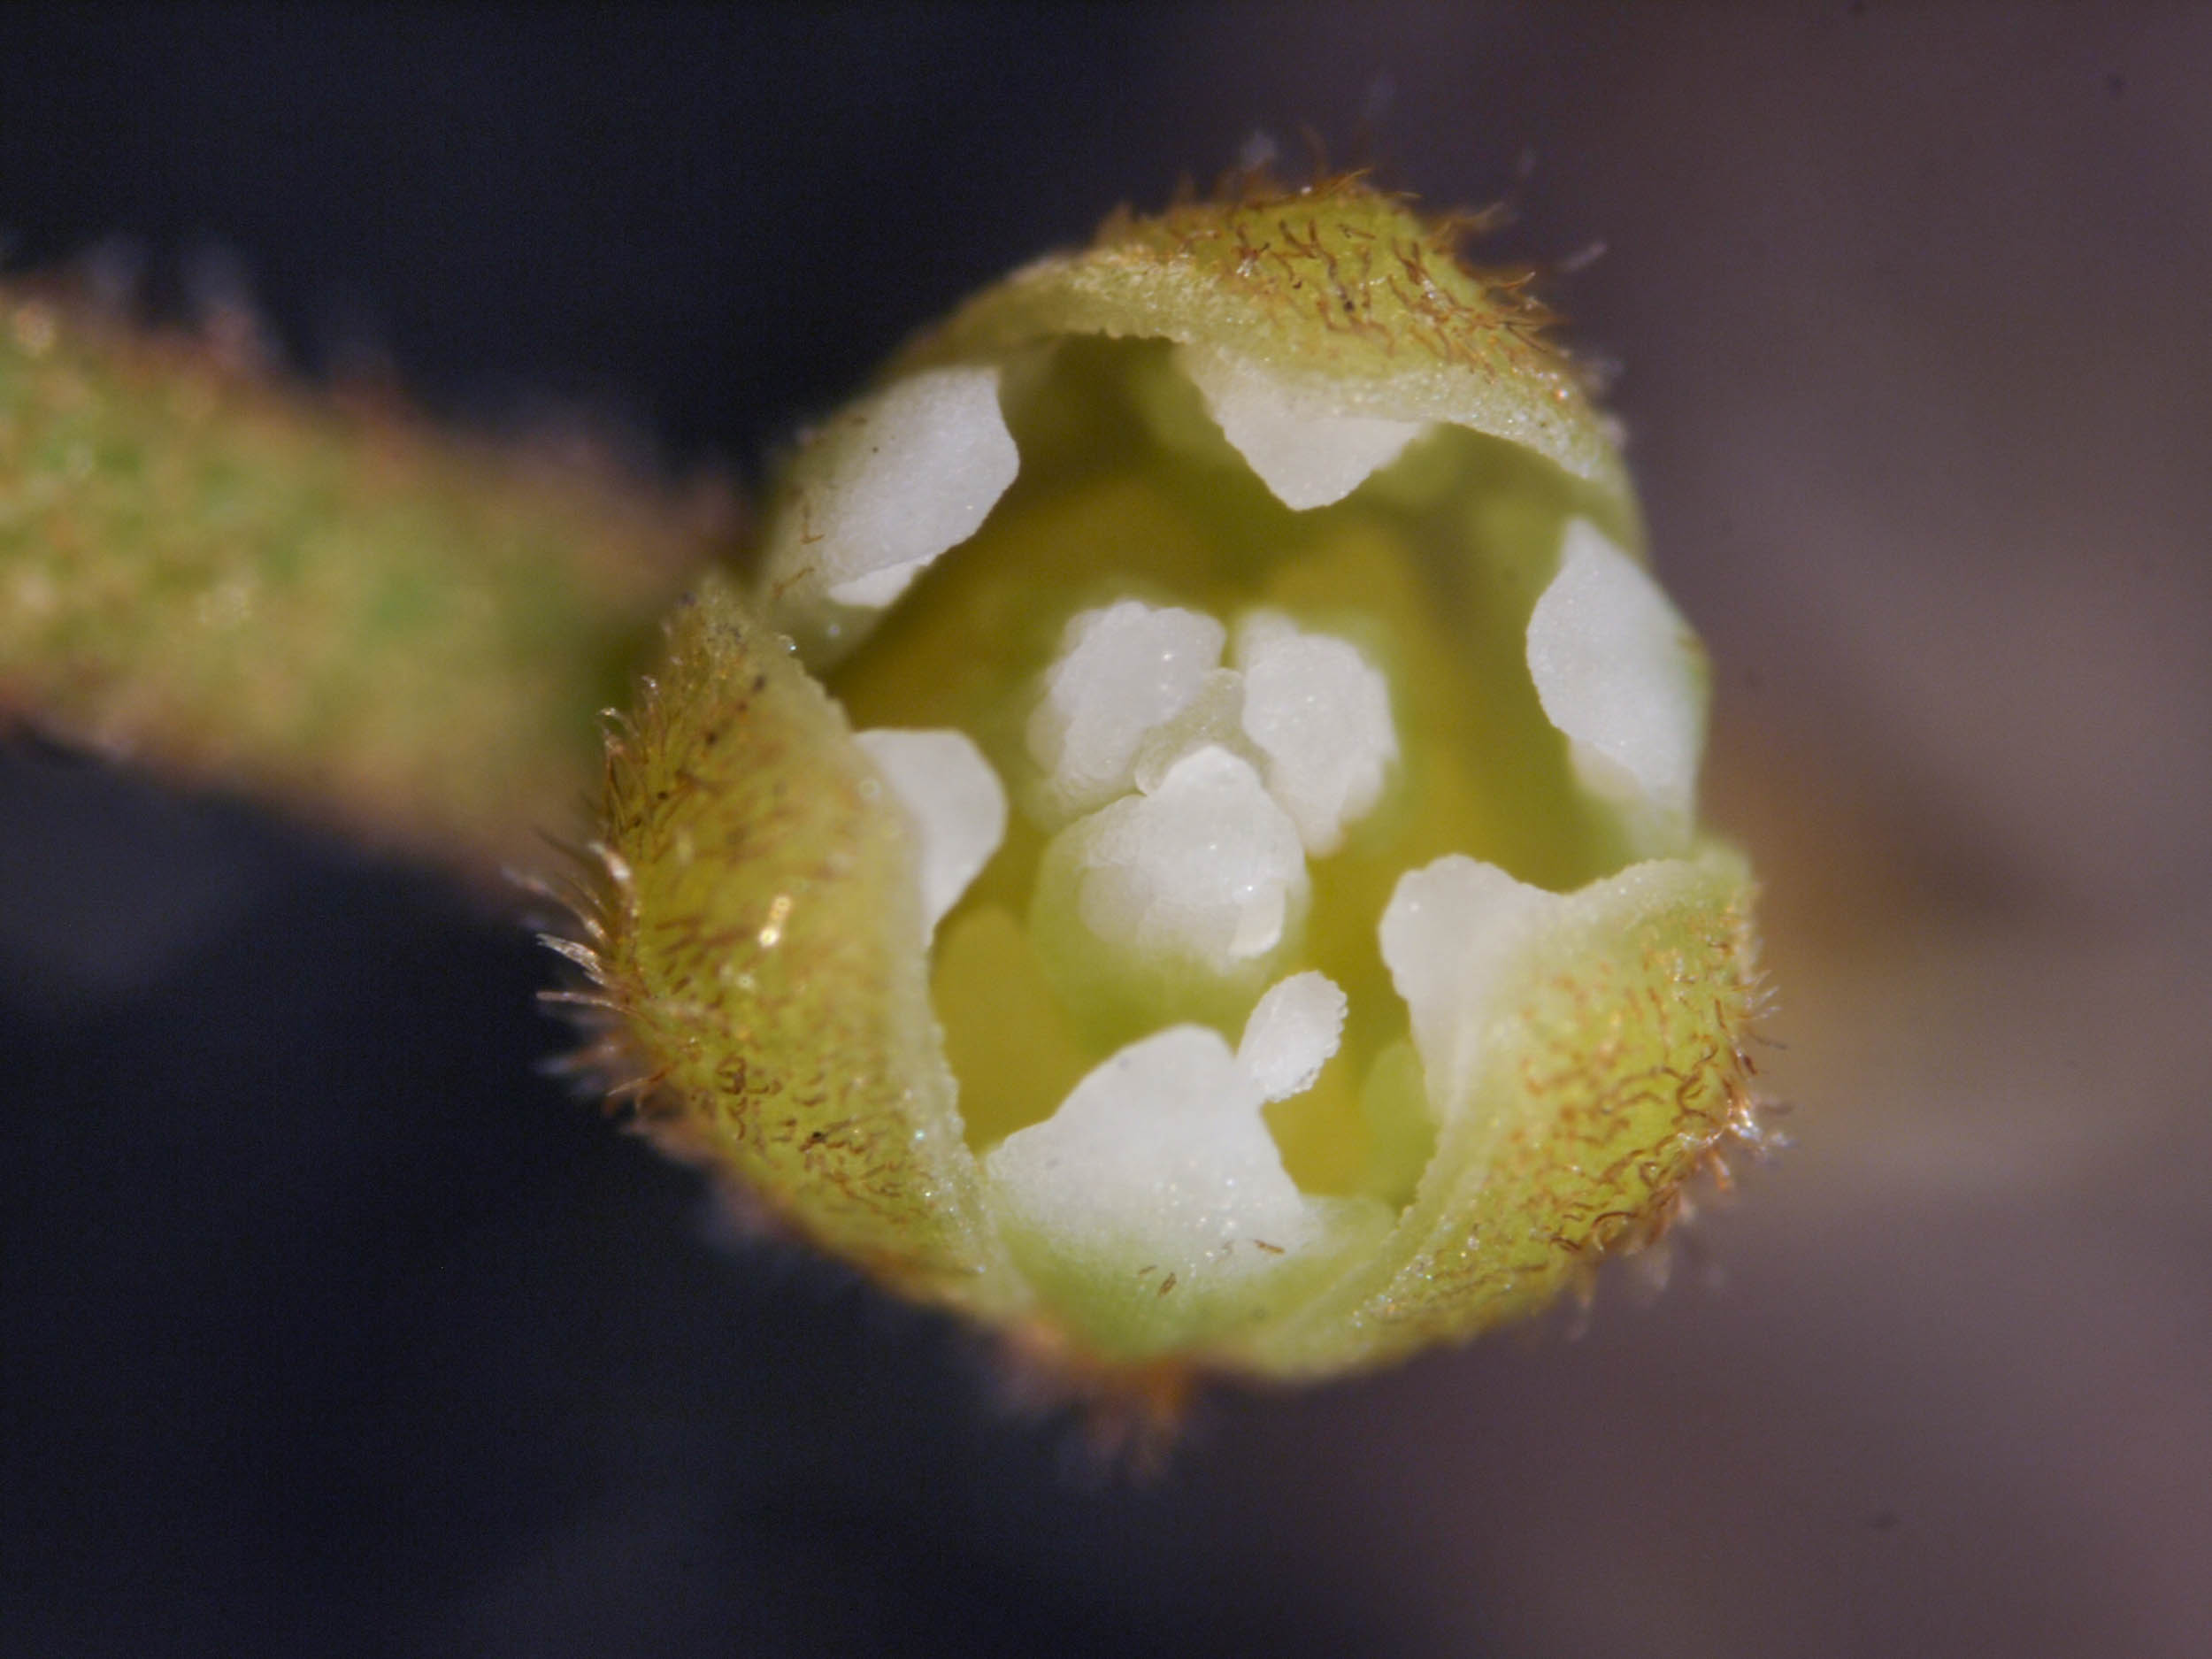  A close look at one of the tiny opened  Cassytha  flowers. 